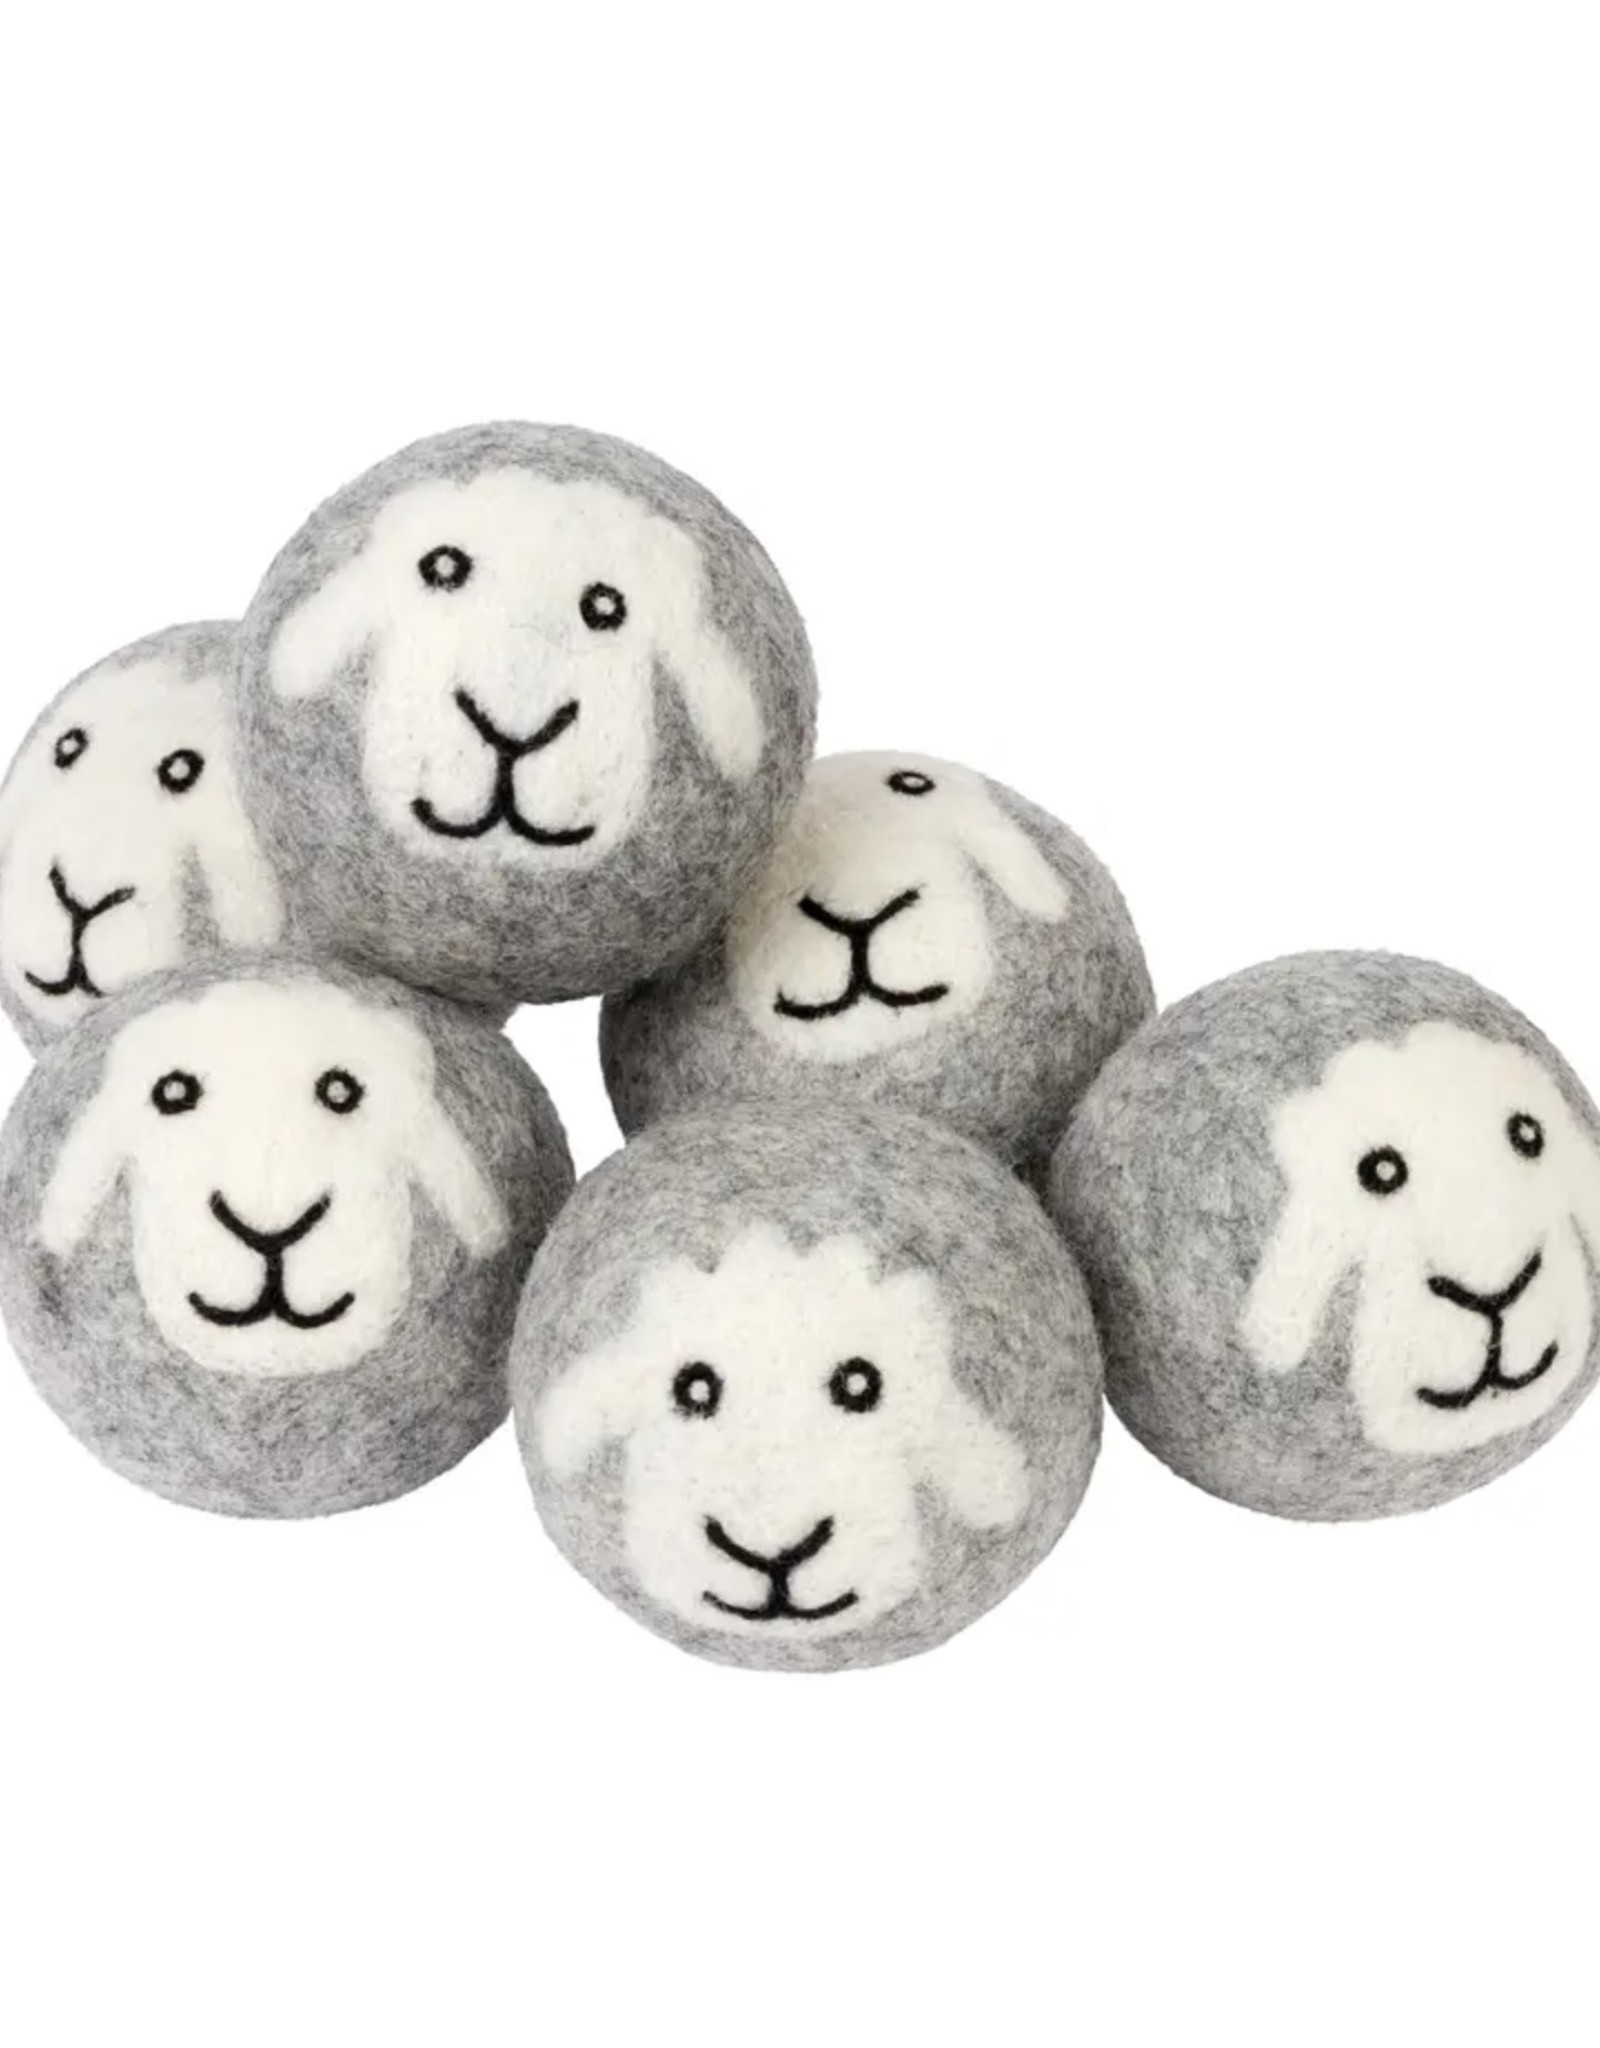 Mama Moon Smiling Sheep Hand Felted Wool Dryer Balls - Gray & White